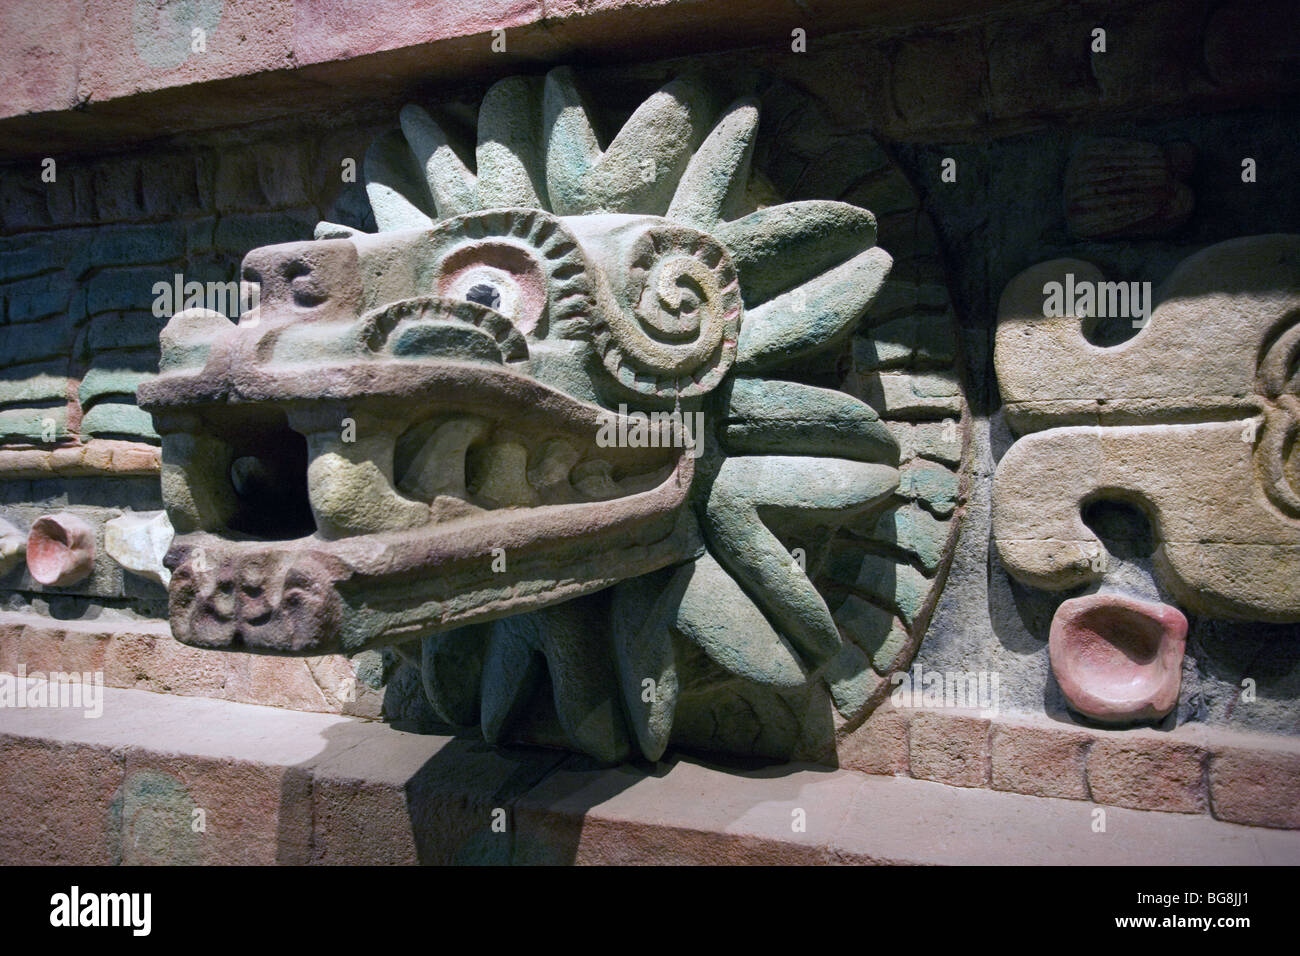 PRE-COLUMBIAN ART. MEXICO. Head of Quetzalcoatl snake. National Museum of Anthropology. Mexico D.F. Stock Photo